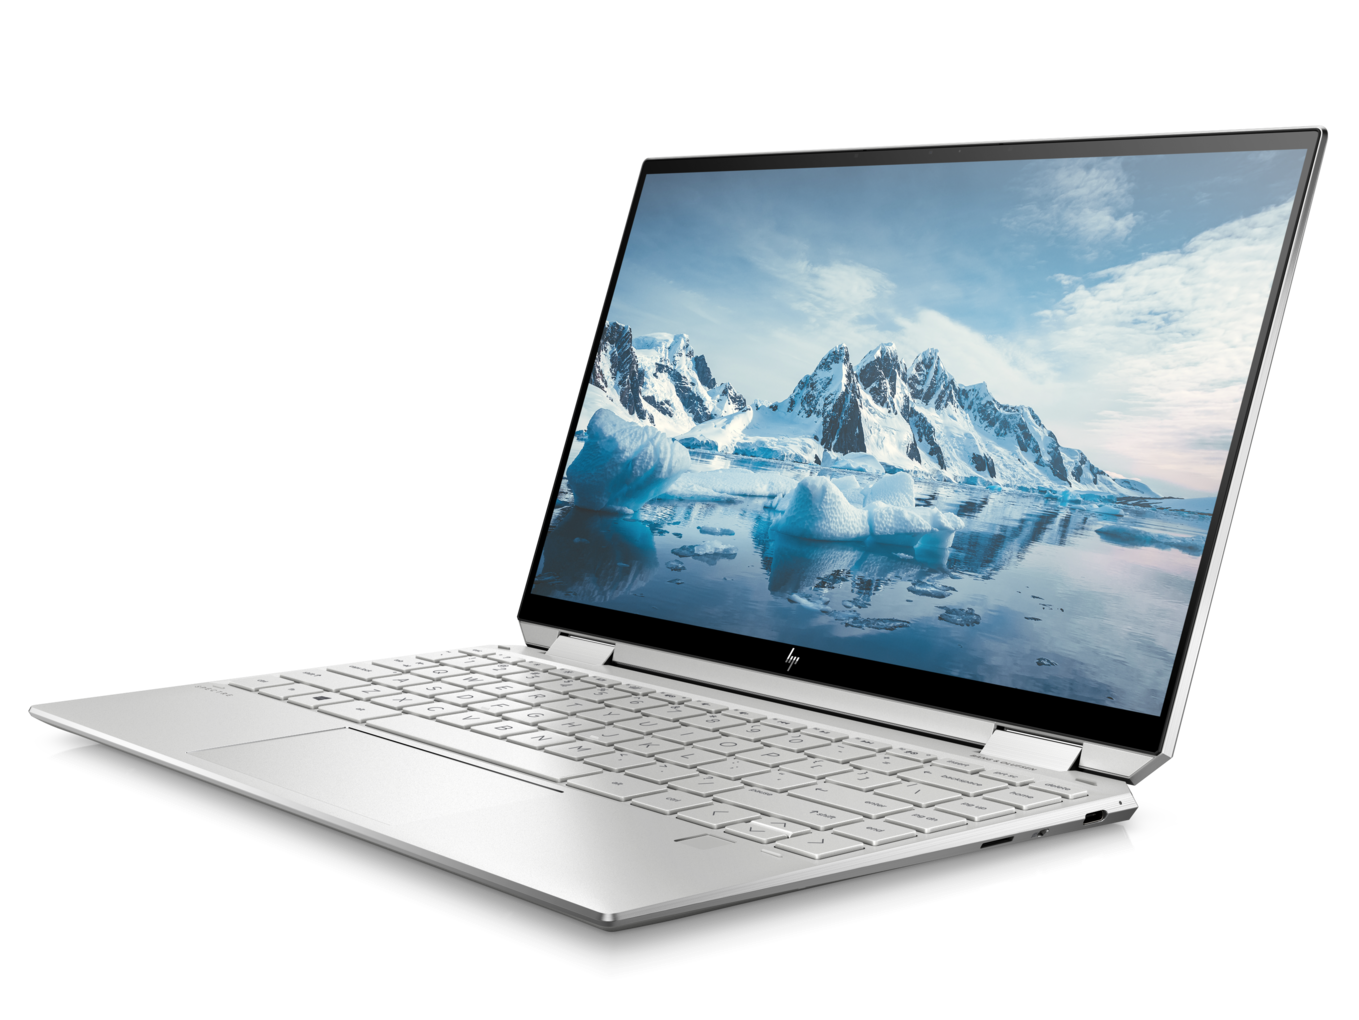 HP Spectre x360 13-aw0013dx Convertible Review: Powered by Intel